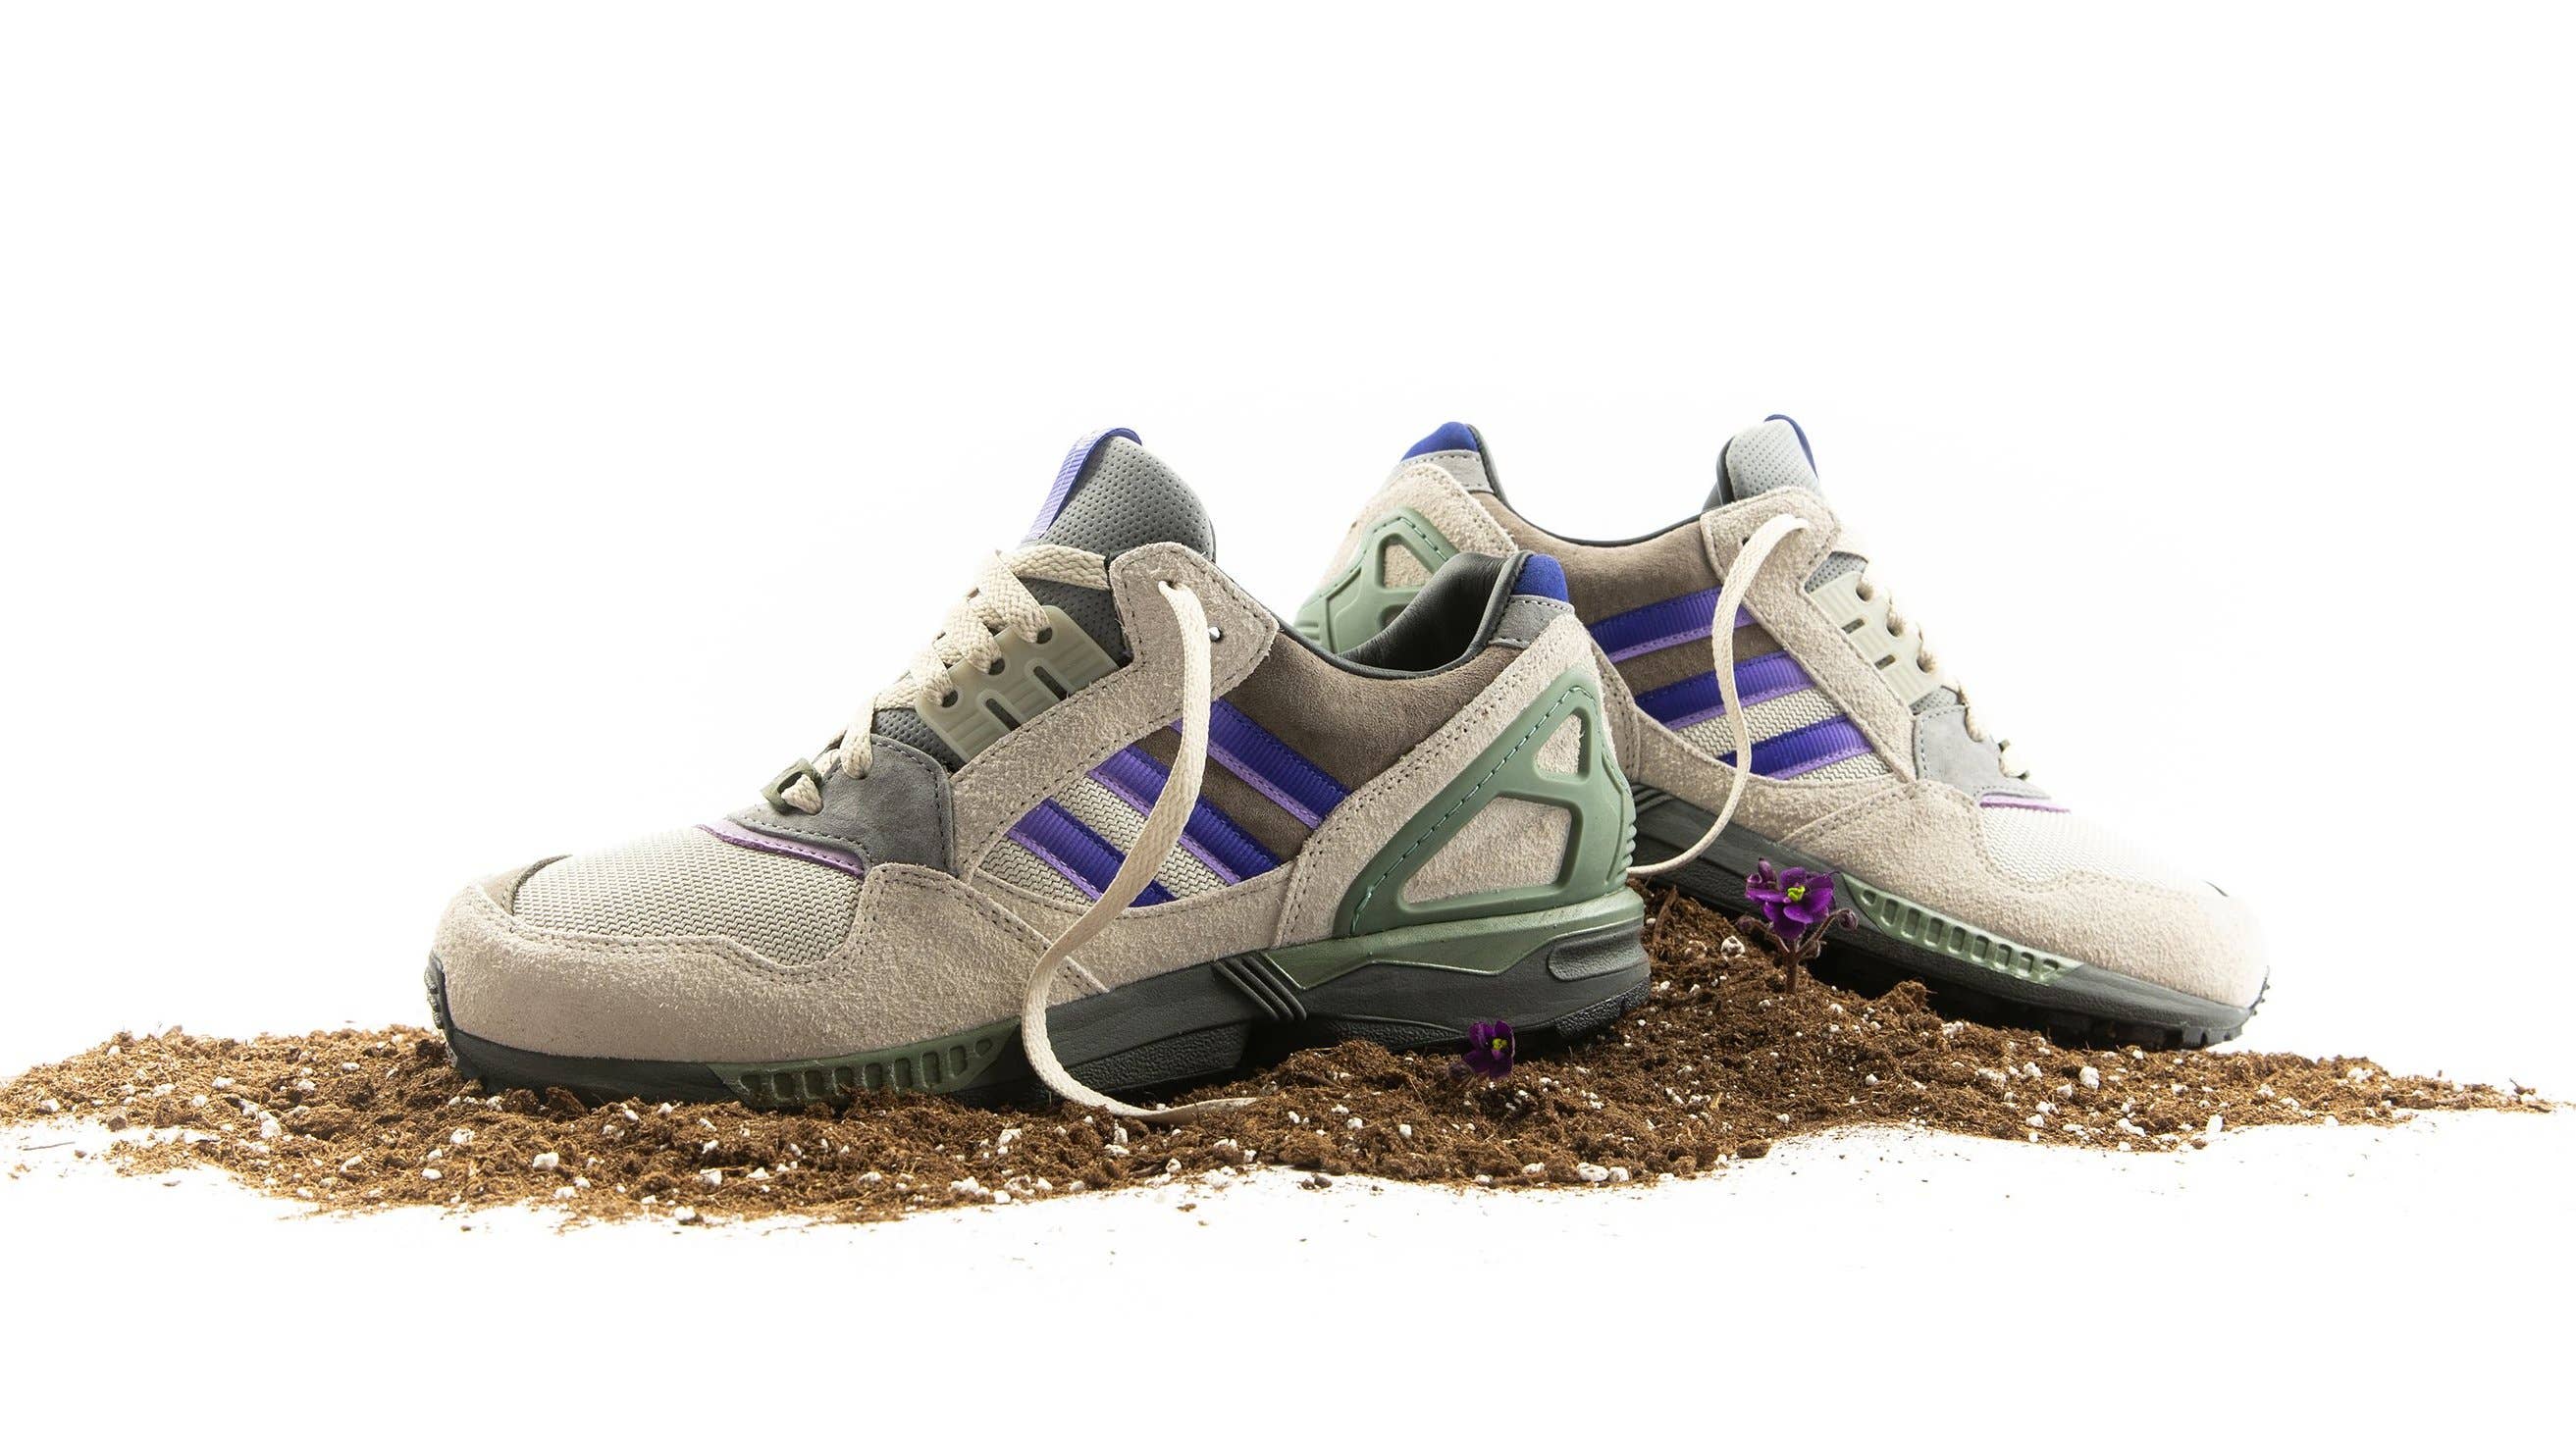 packer shoes adidas consortium zx 9000 meadow violet